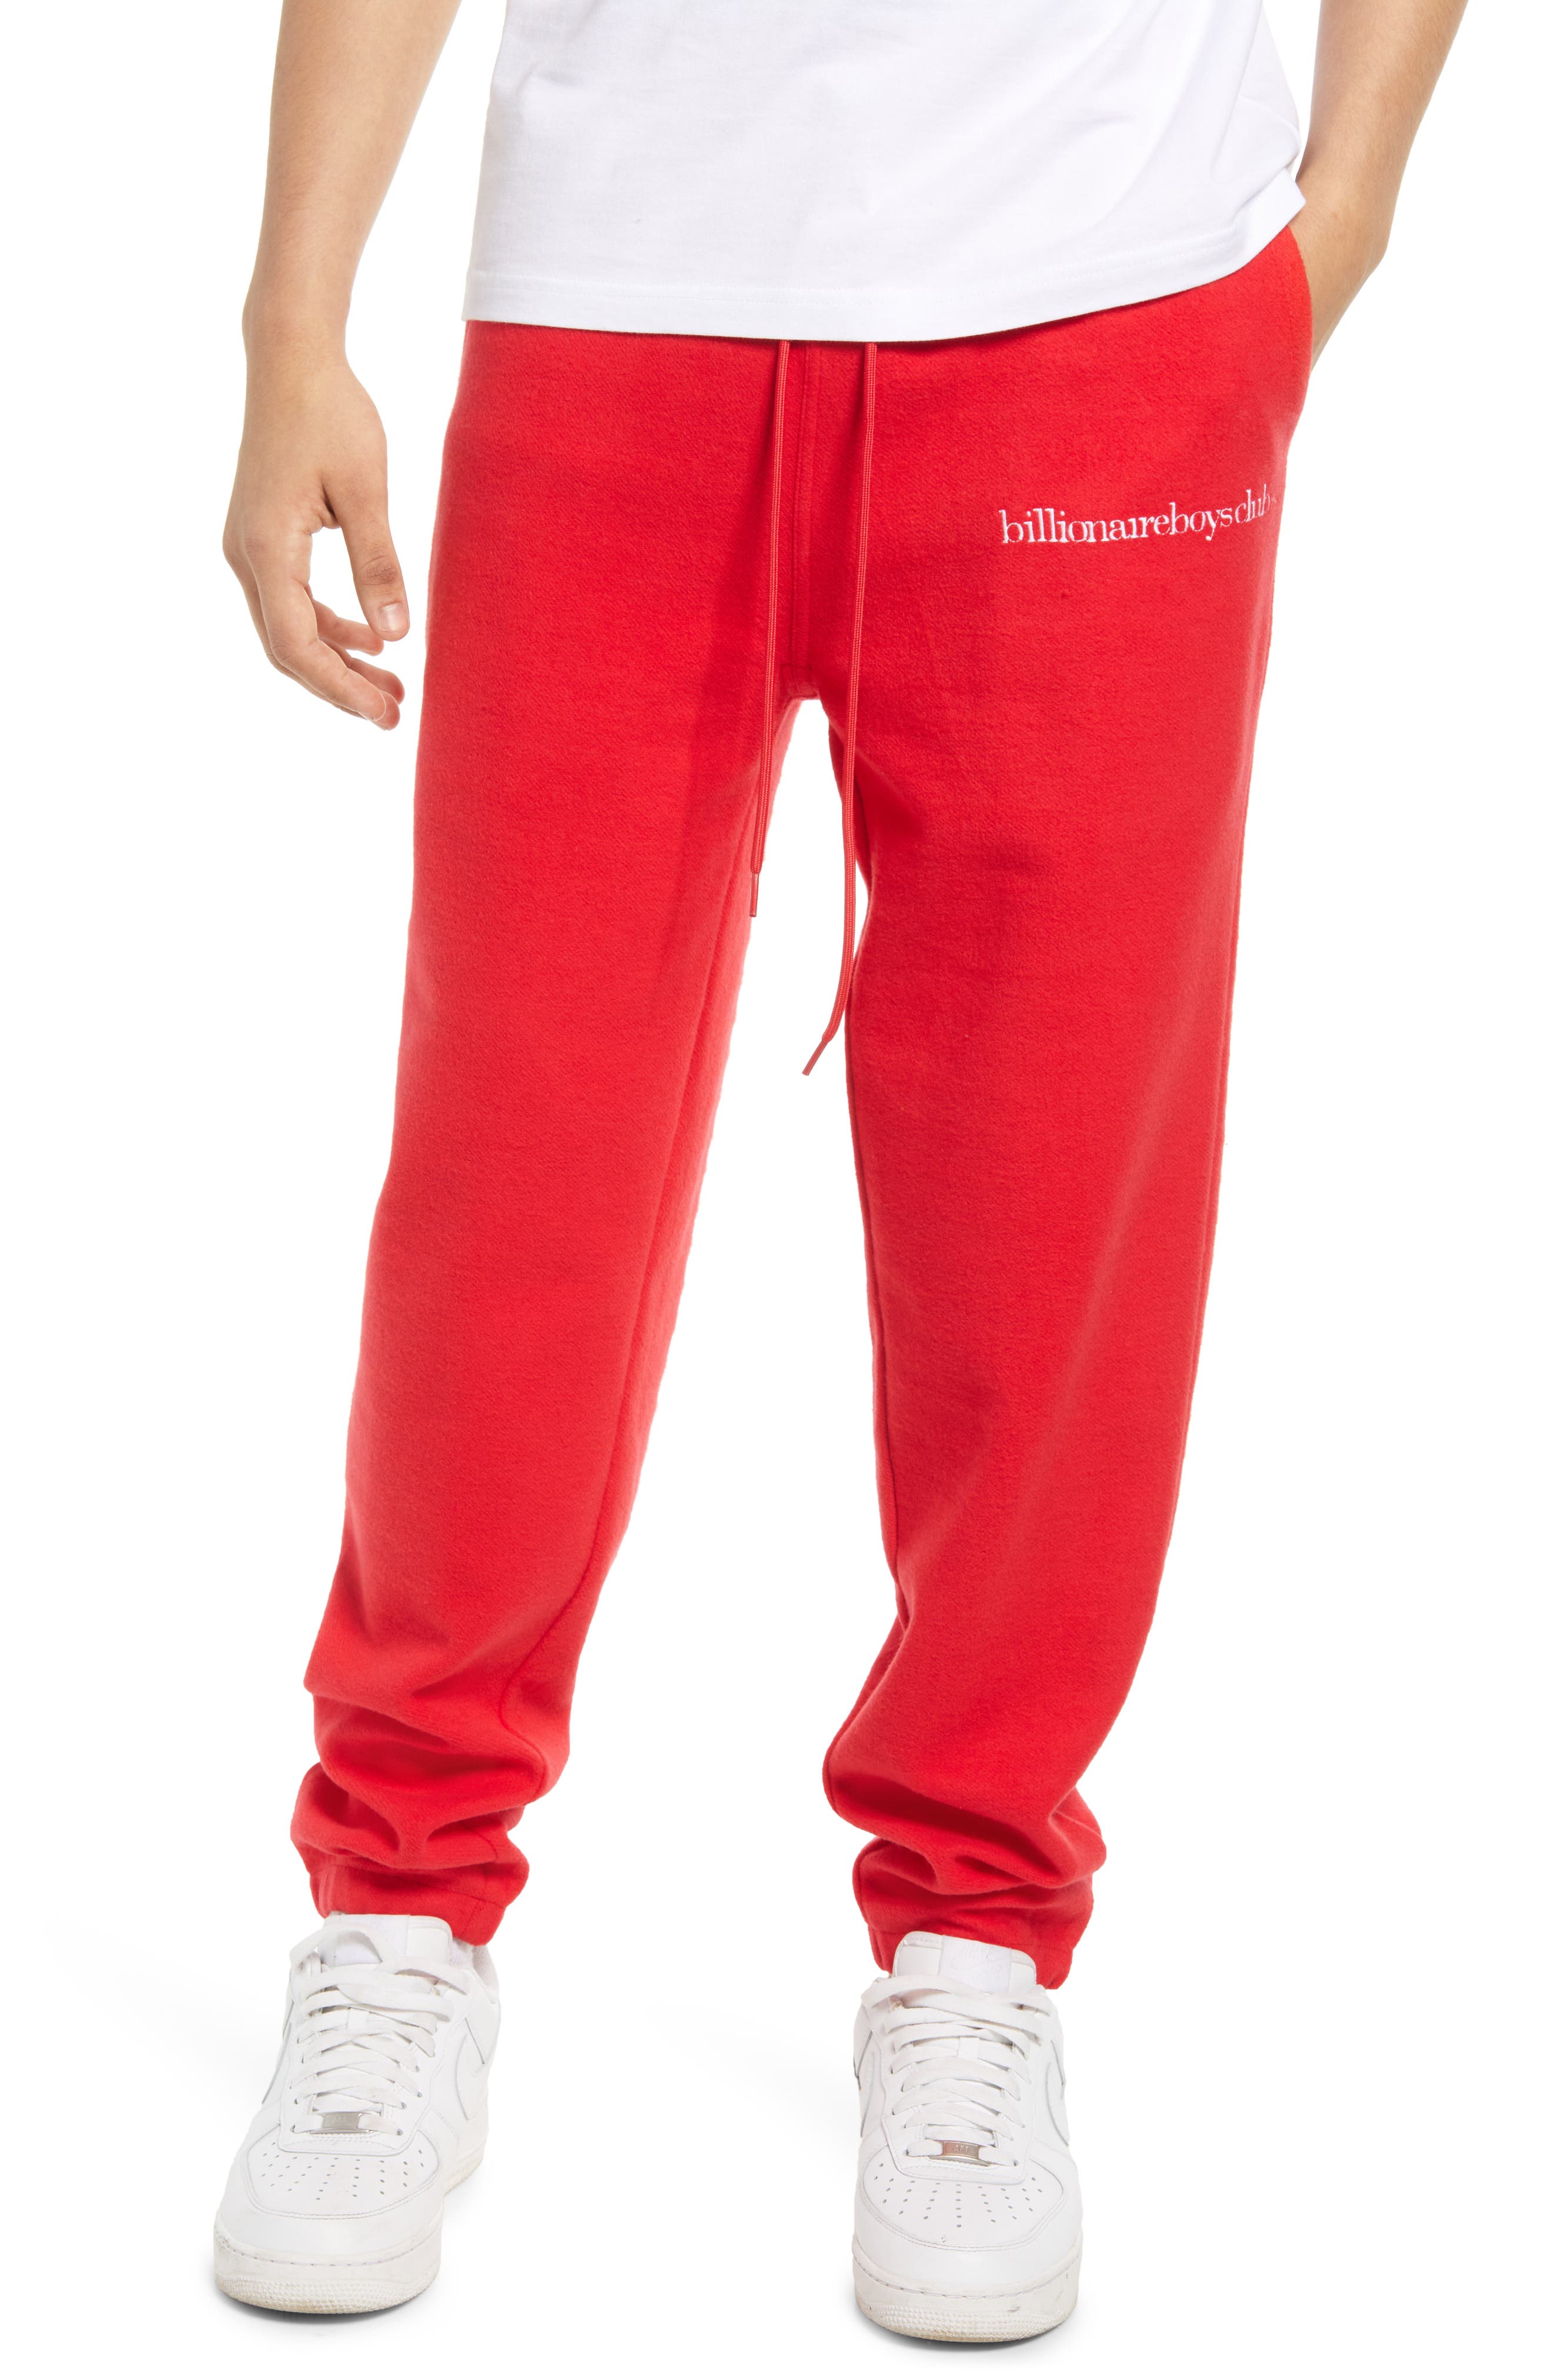 Billionaire Boys Club BB Lifeforce Sweatpants in Lollipop Red at Nordstrom, Size X-Large